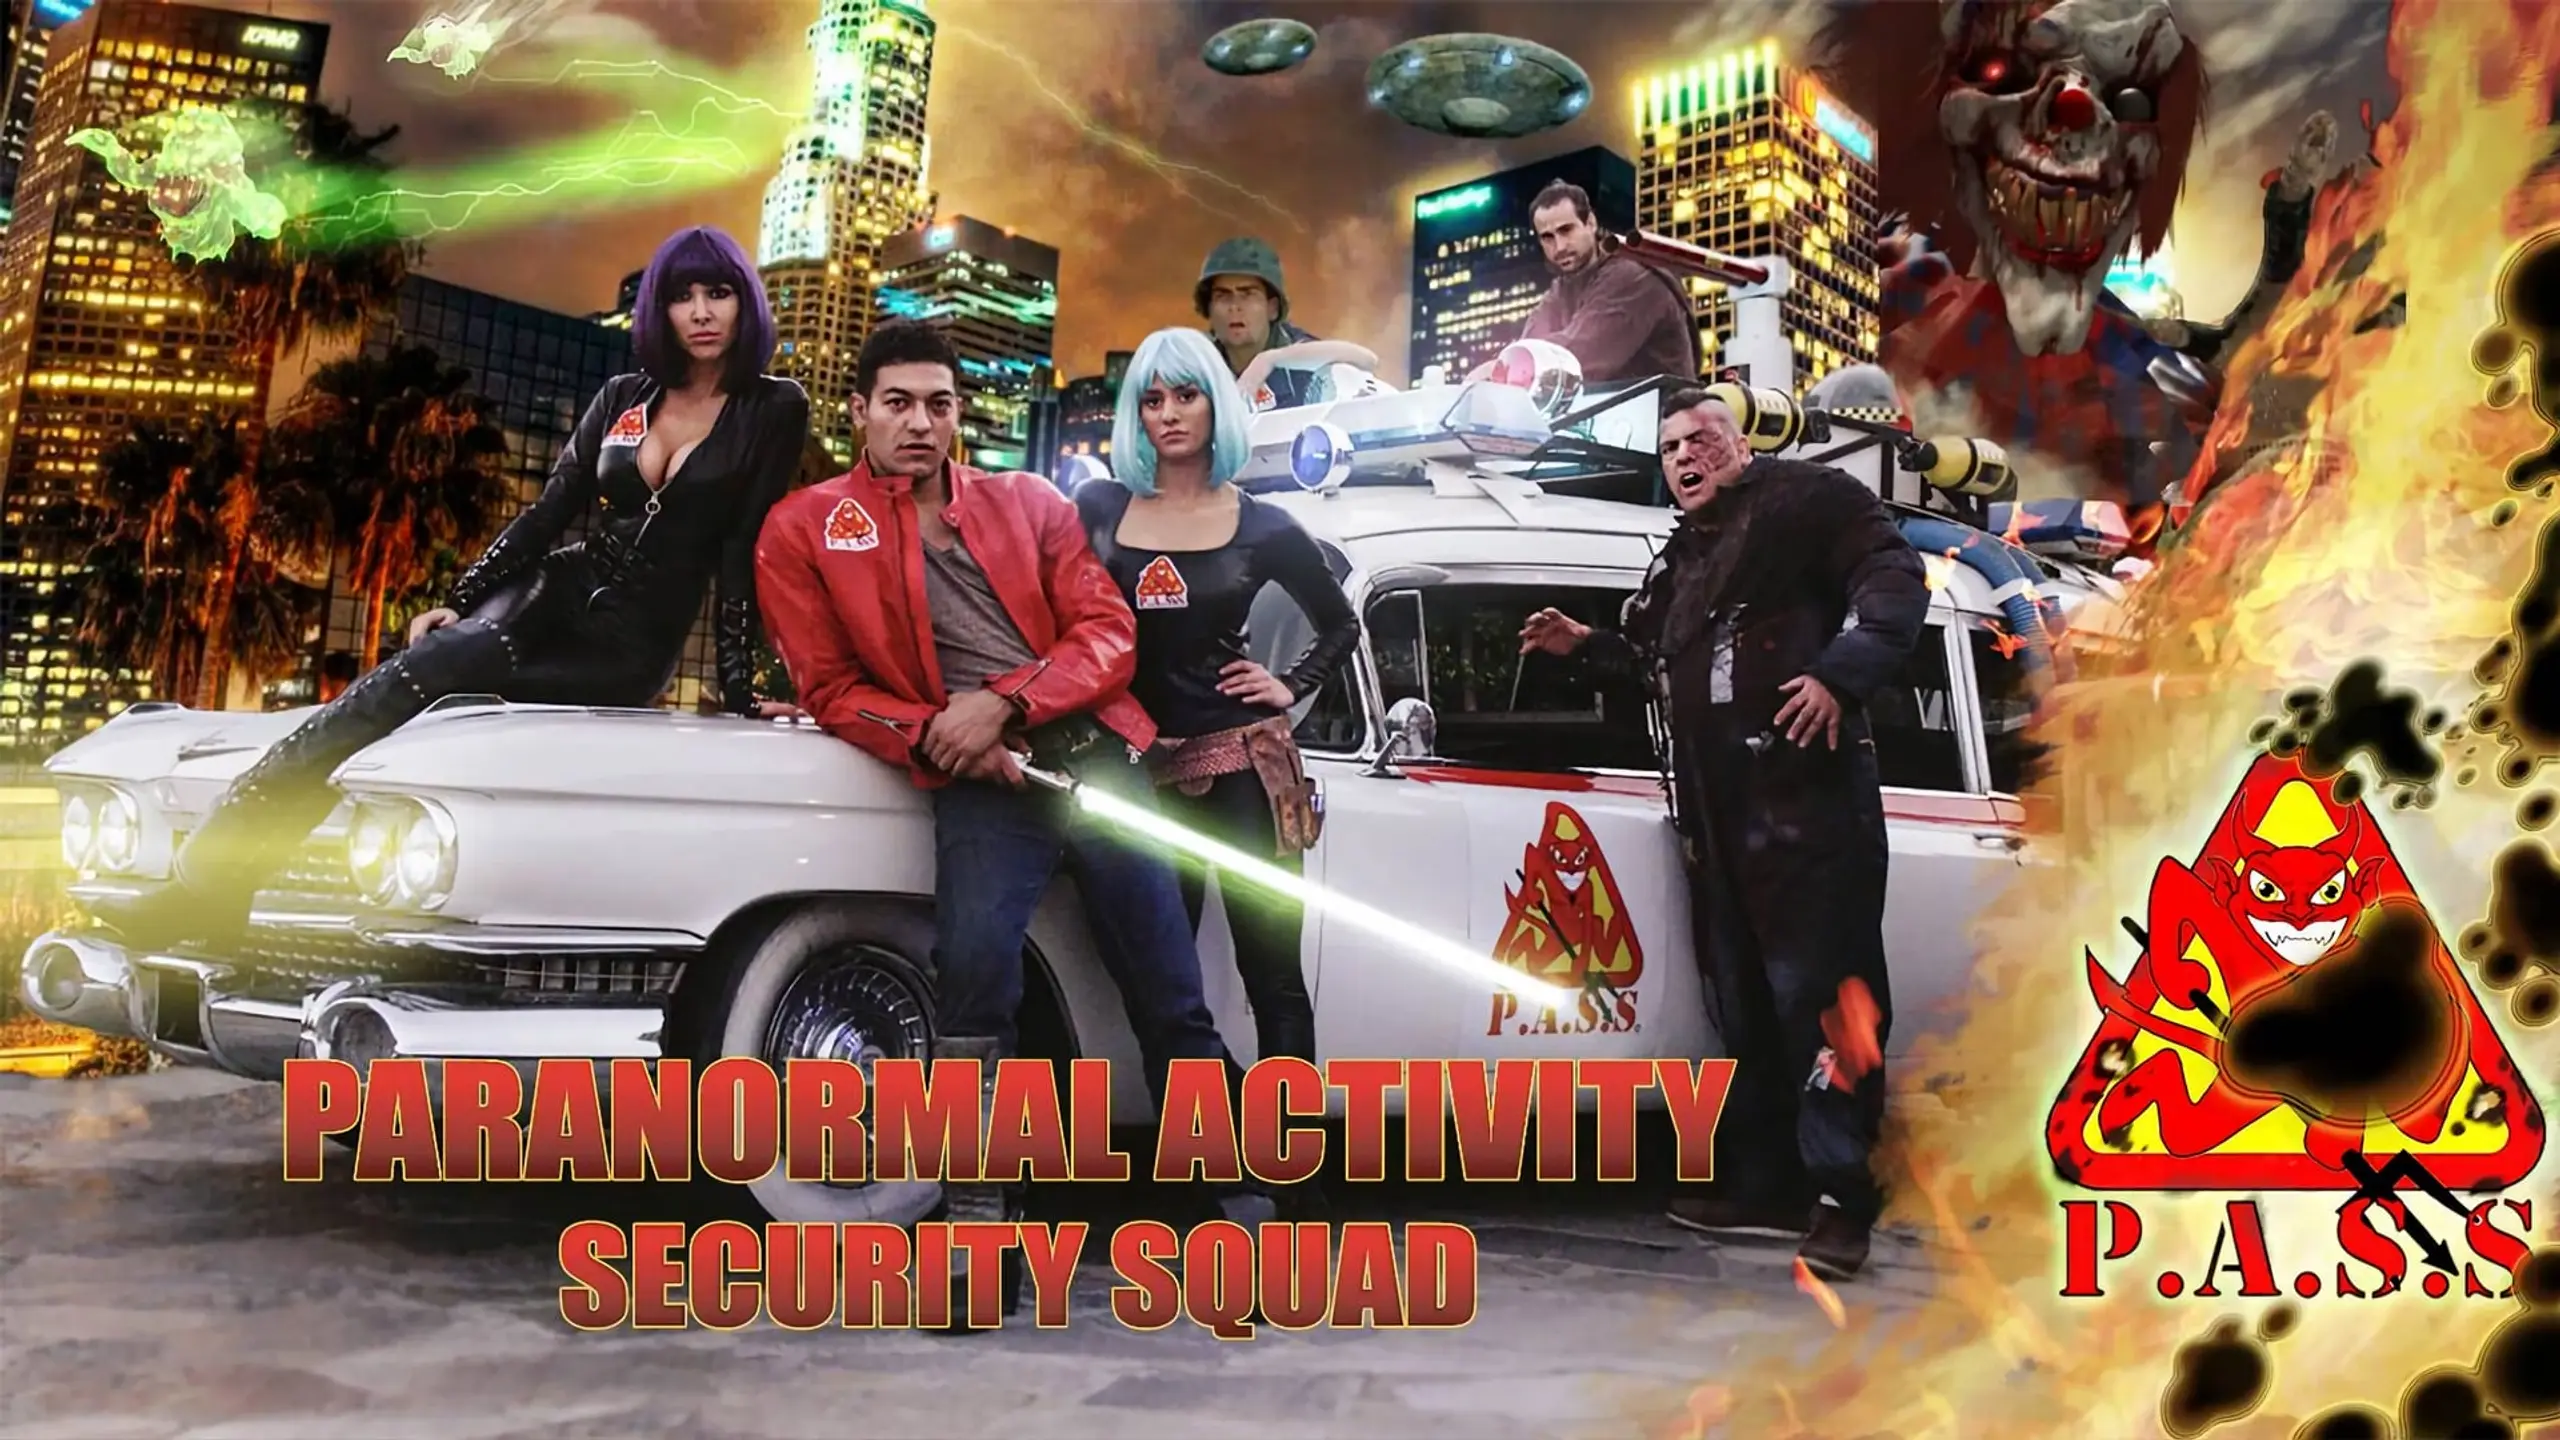 Paranormal Activity Security Squad